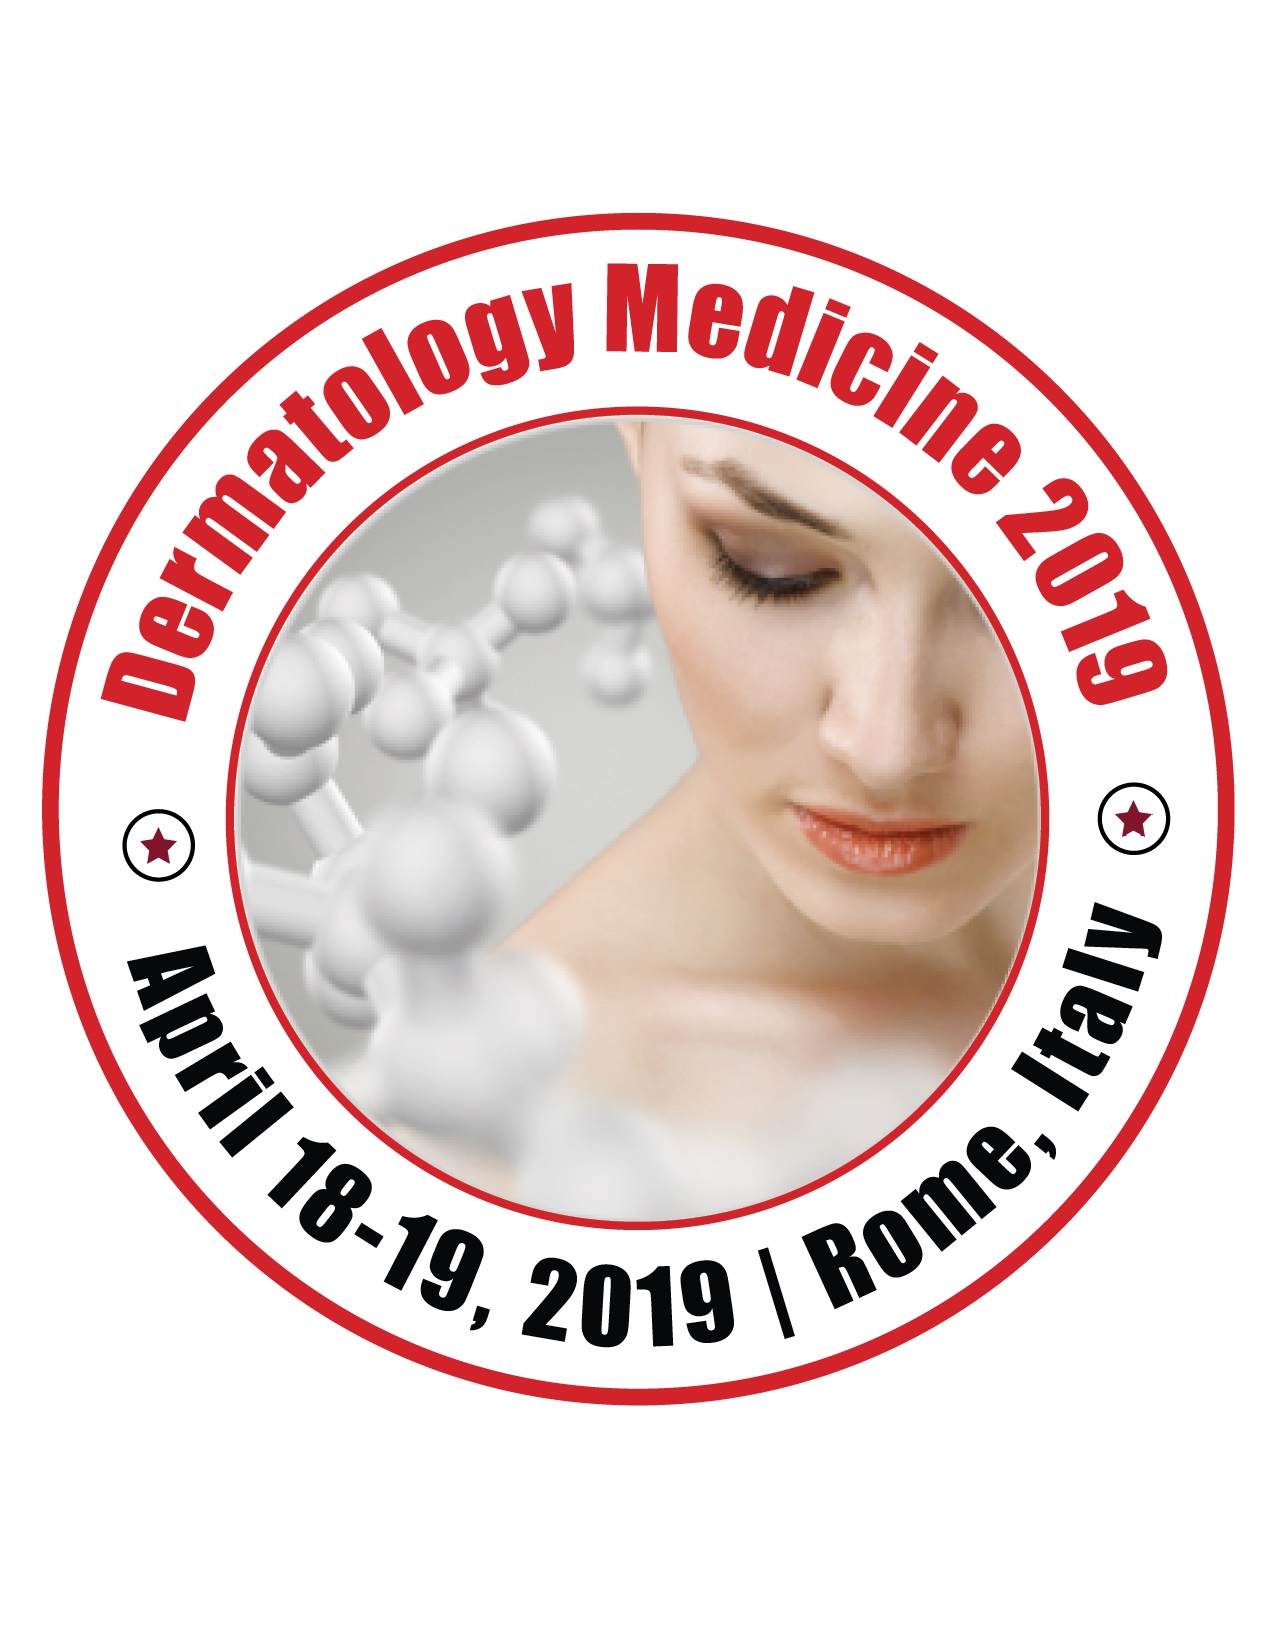 14th International Conference on Dermatology and Cosmetic Medicine  